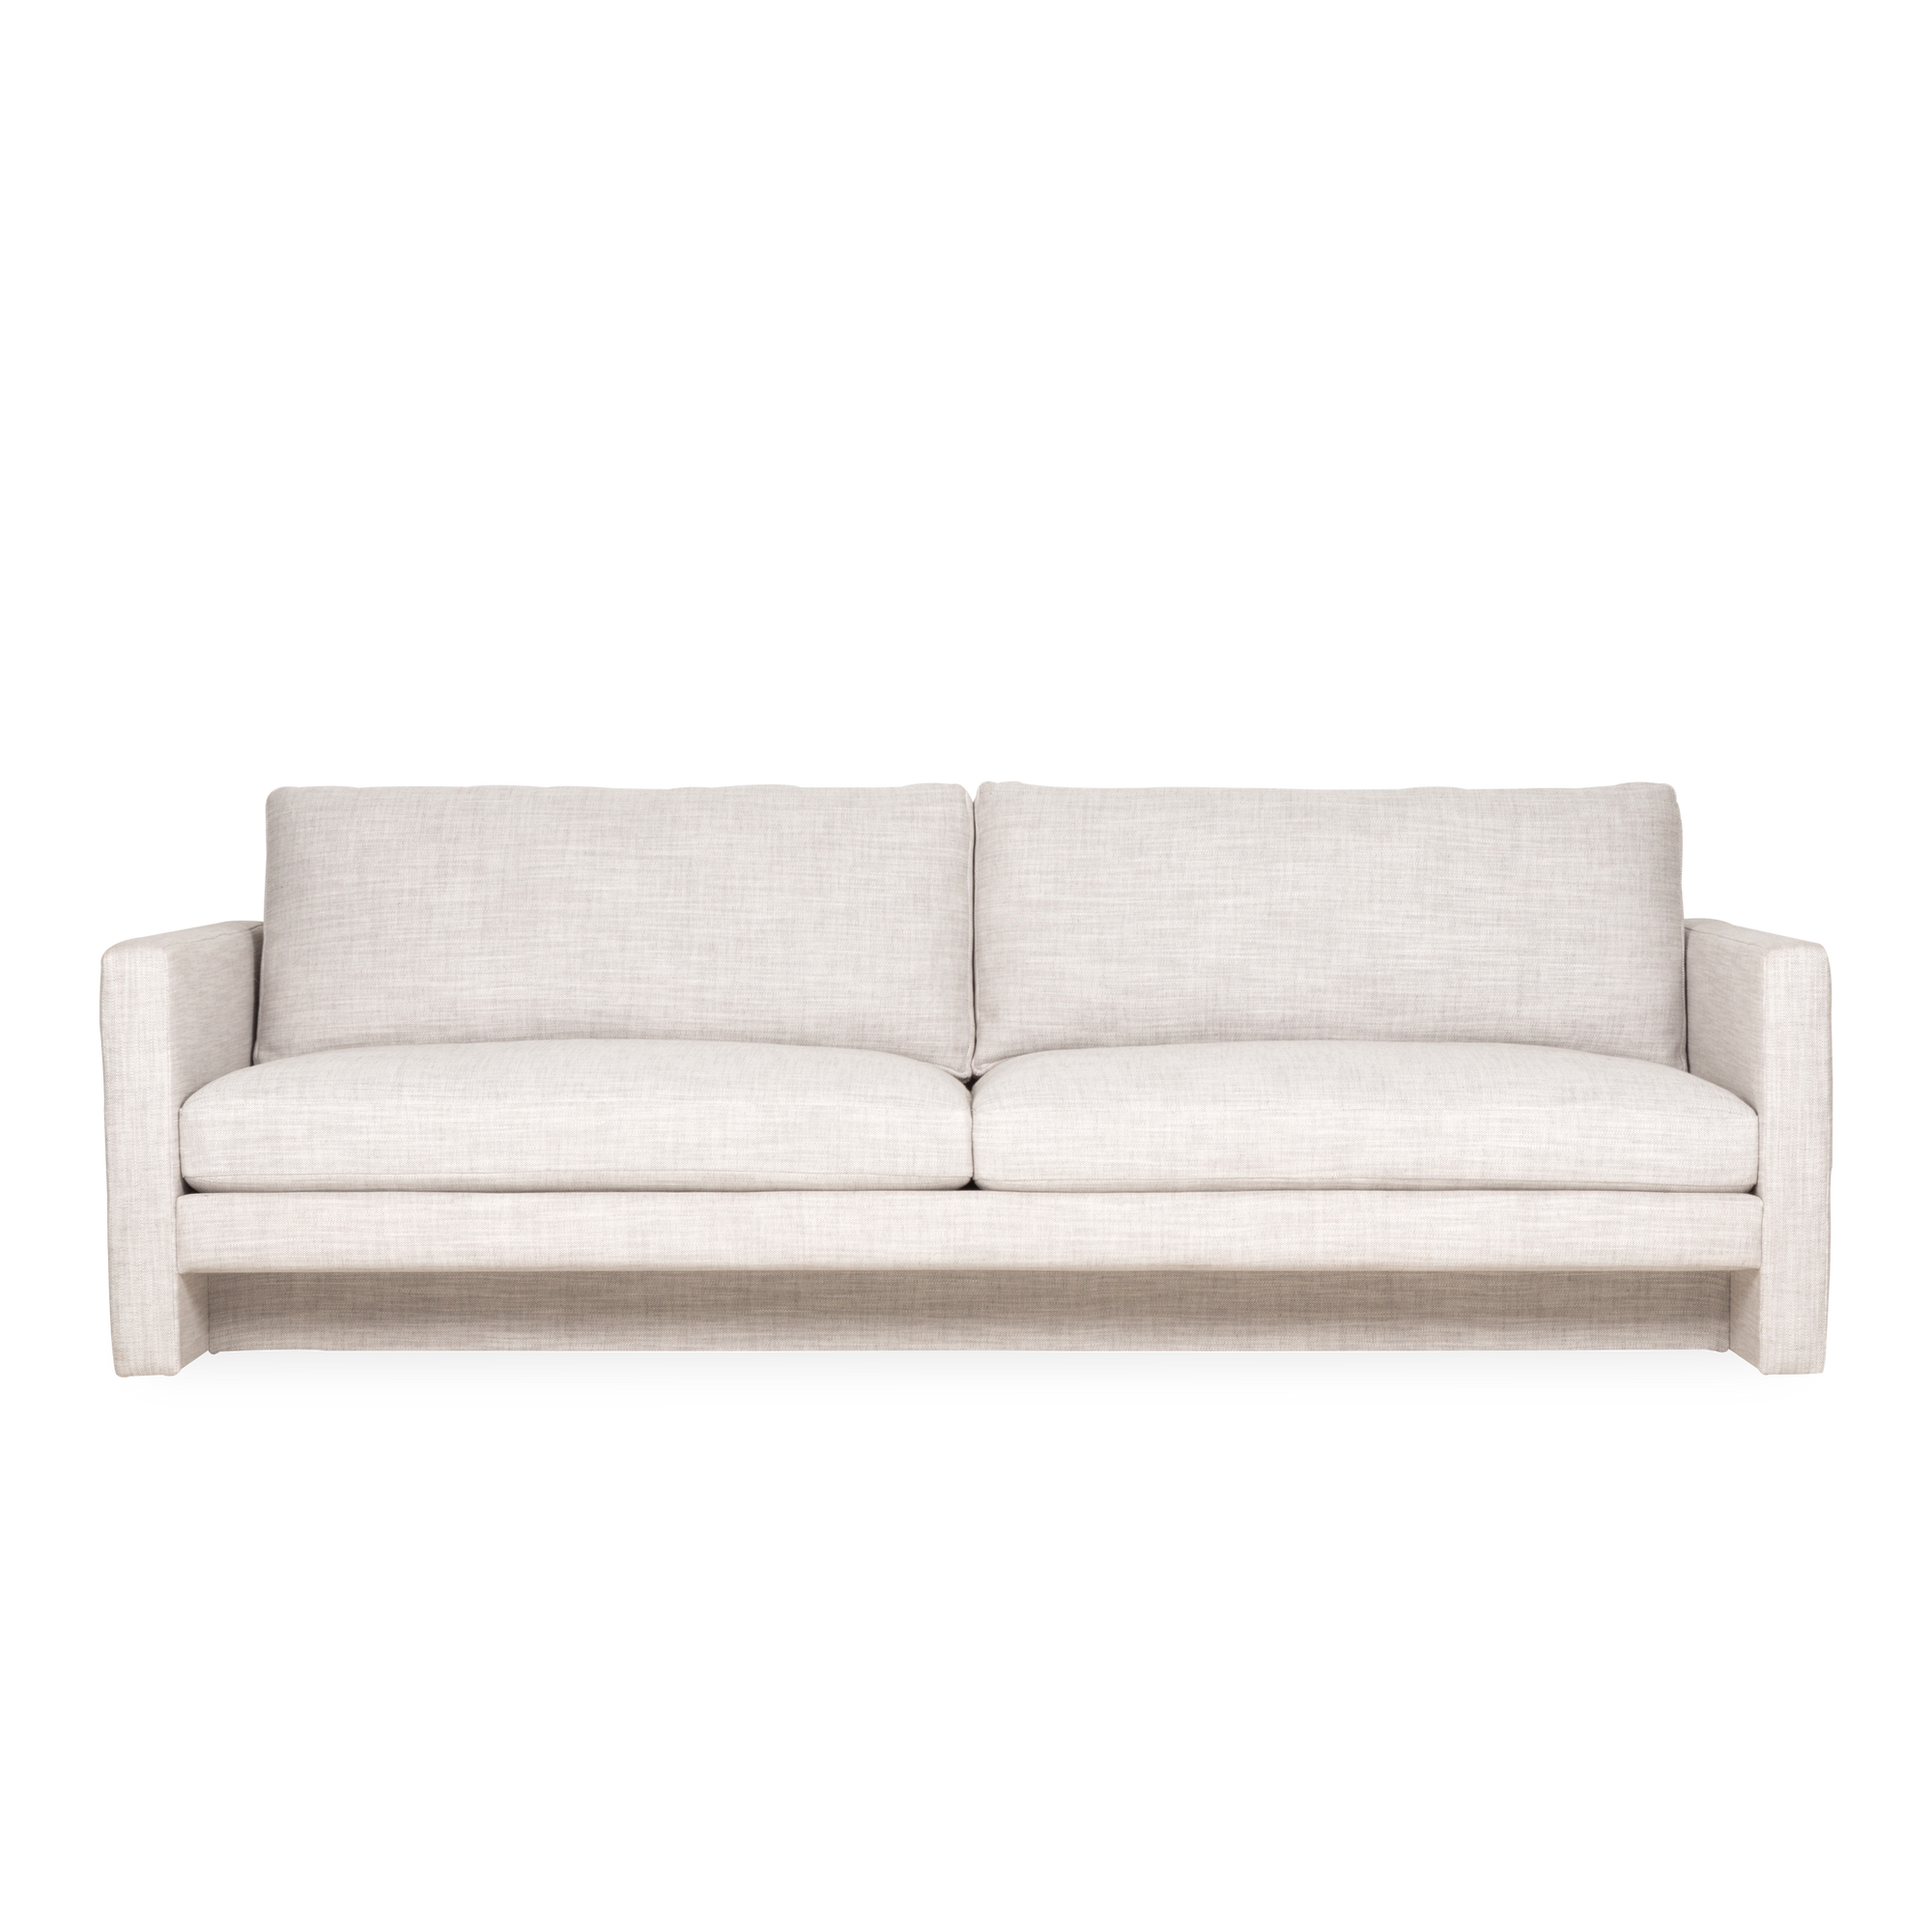 Introducing the Reveal Sofa, a timeless and understated family of soft seating united by a a playful use of negative spacing.